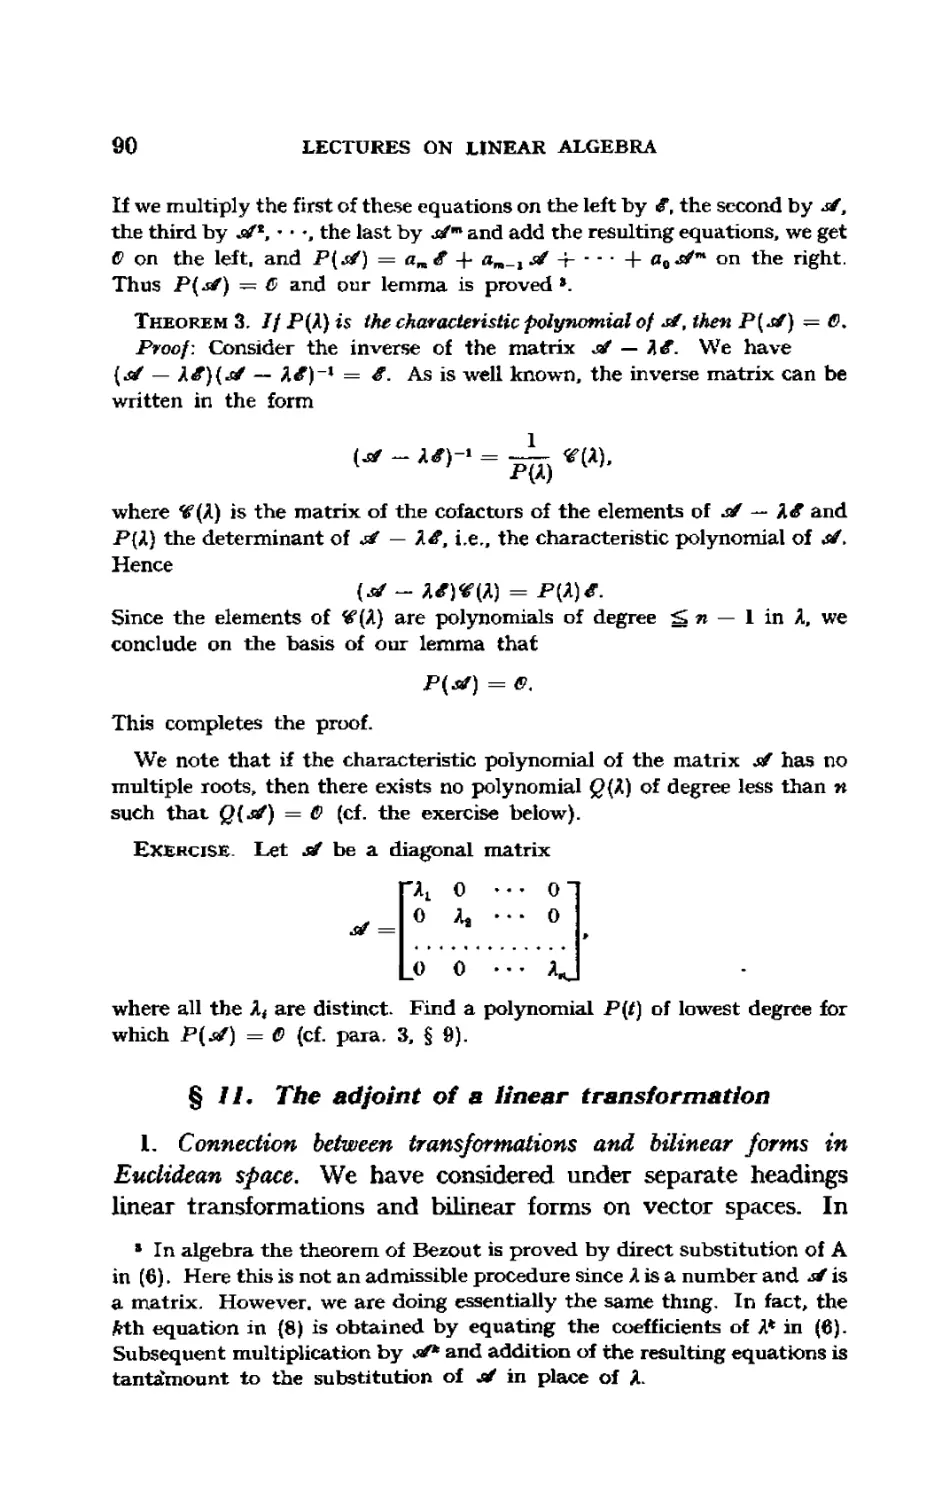 §11. The adjoint of a linear transformation